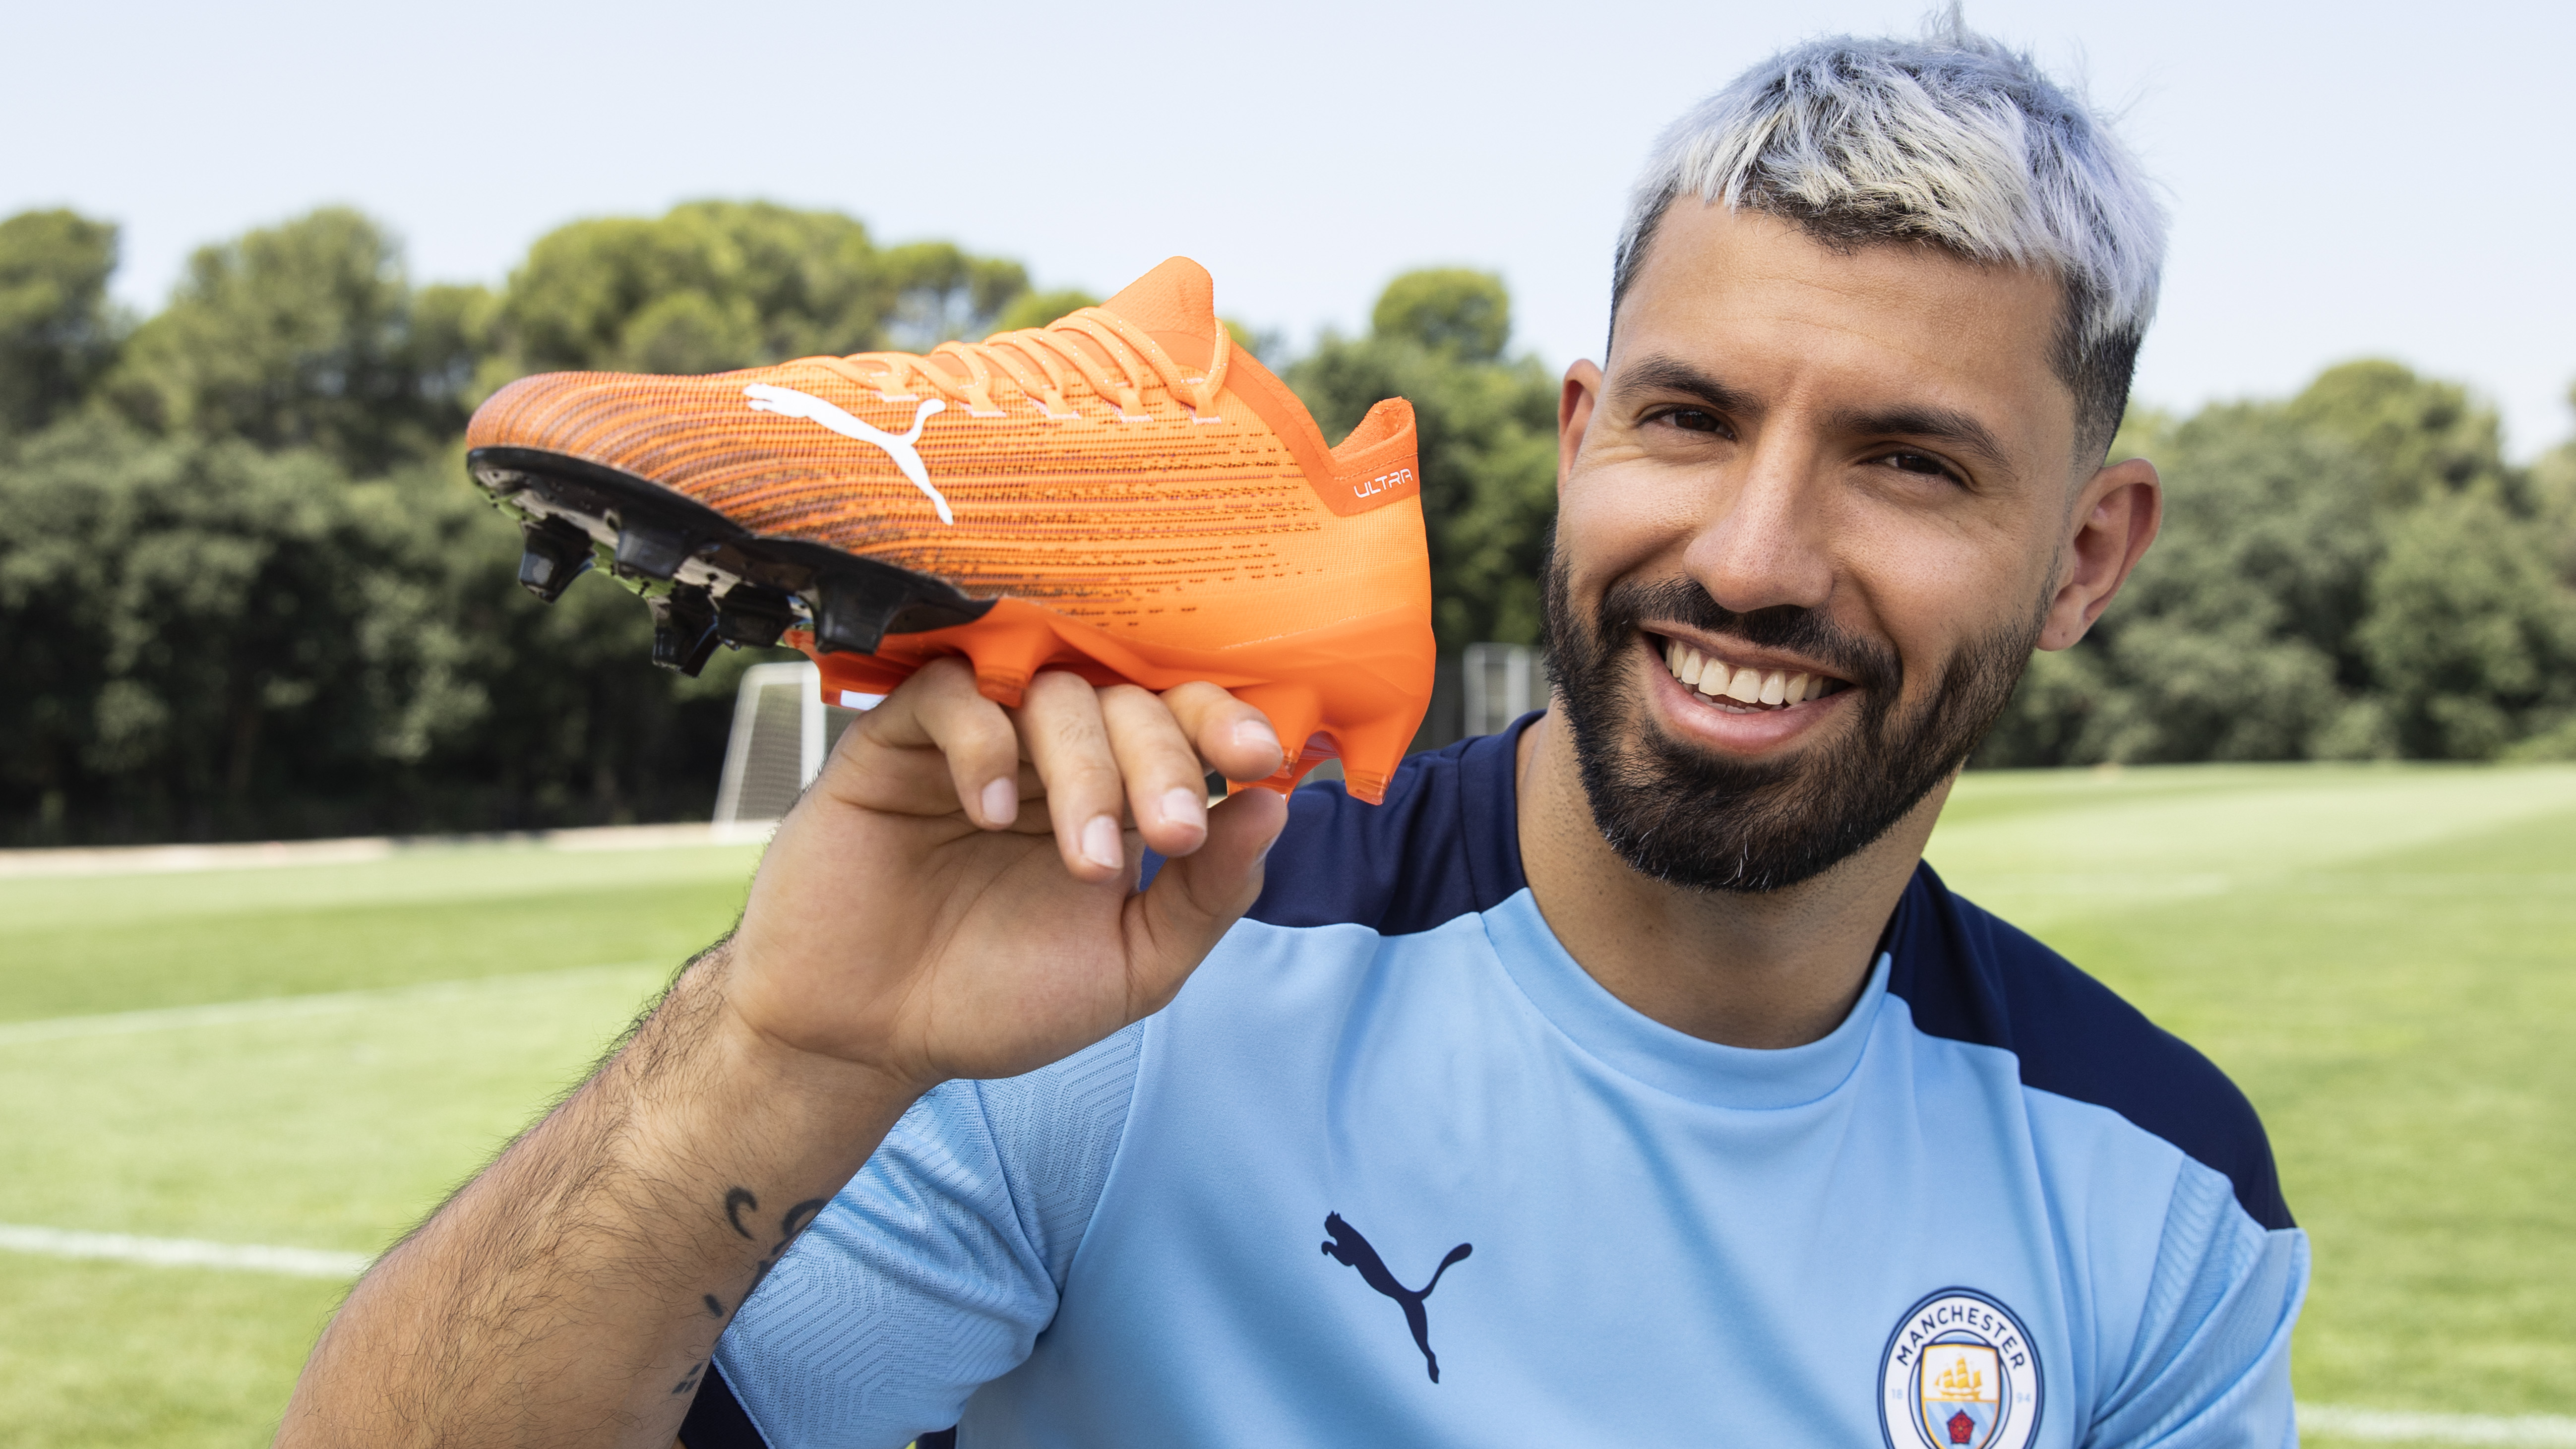 Built for Speed - Antoine Griezmann and Sergio Aguero’s stunning new Puma football boot!